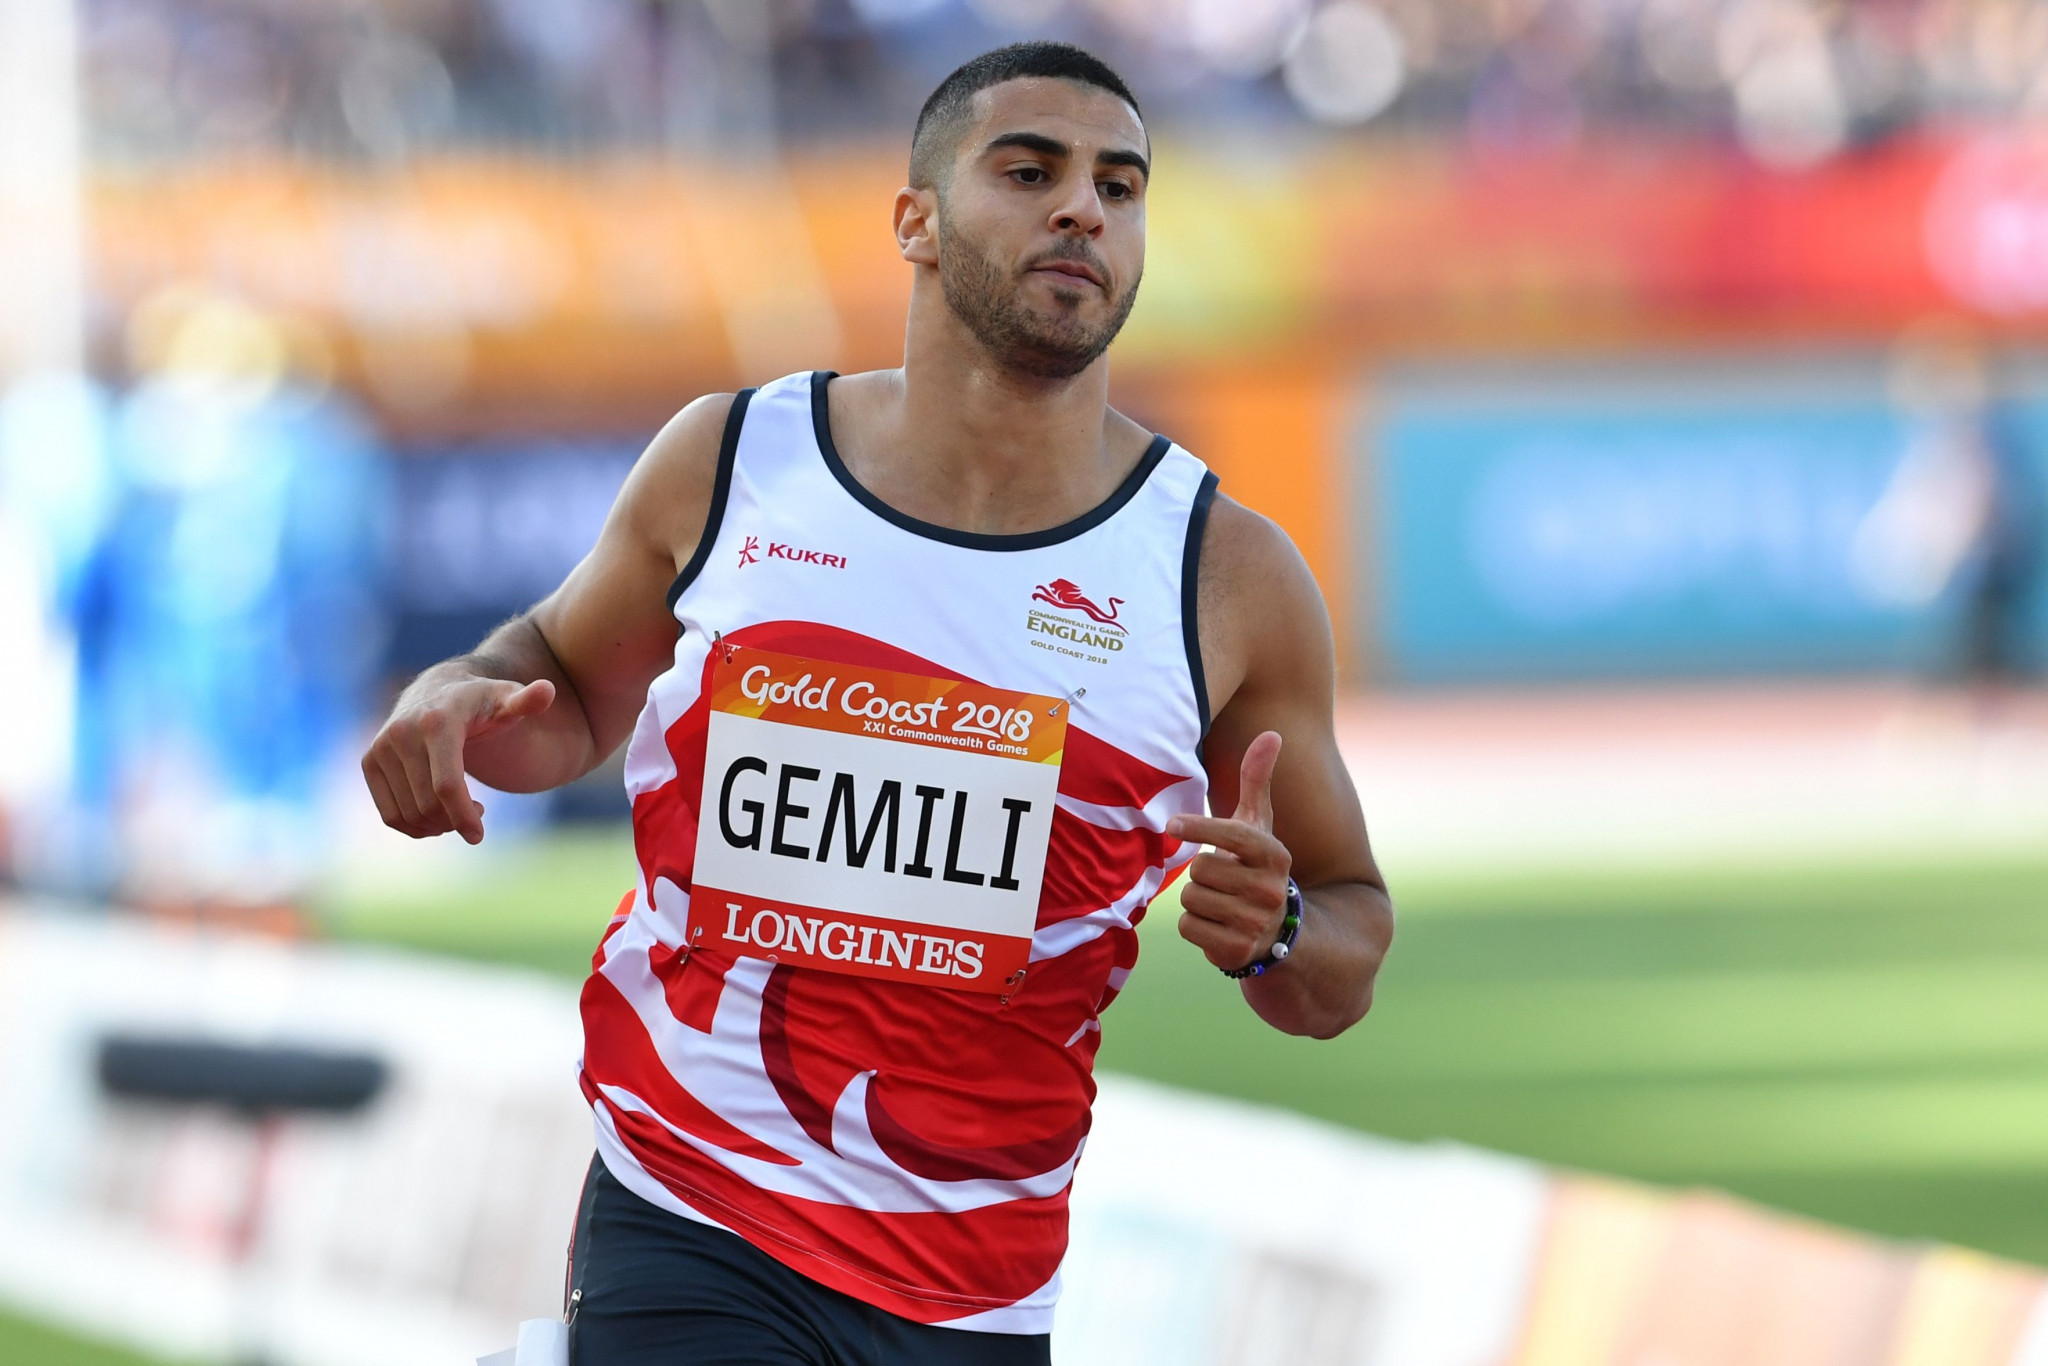 British sprinter Adam Gemili is targeting the Athletics World Cup as he recovers from the injury that forced him to withdraw from the Commonwealth Games ©Getty Images